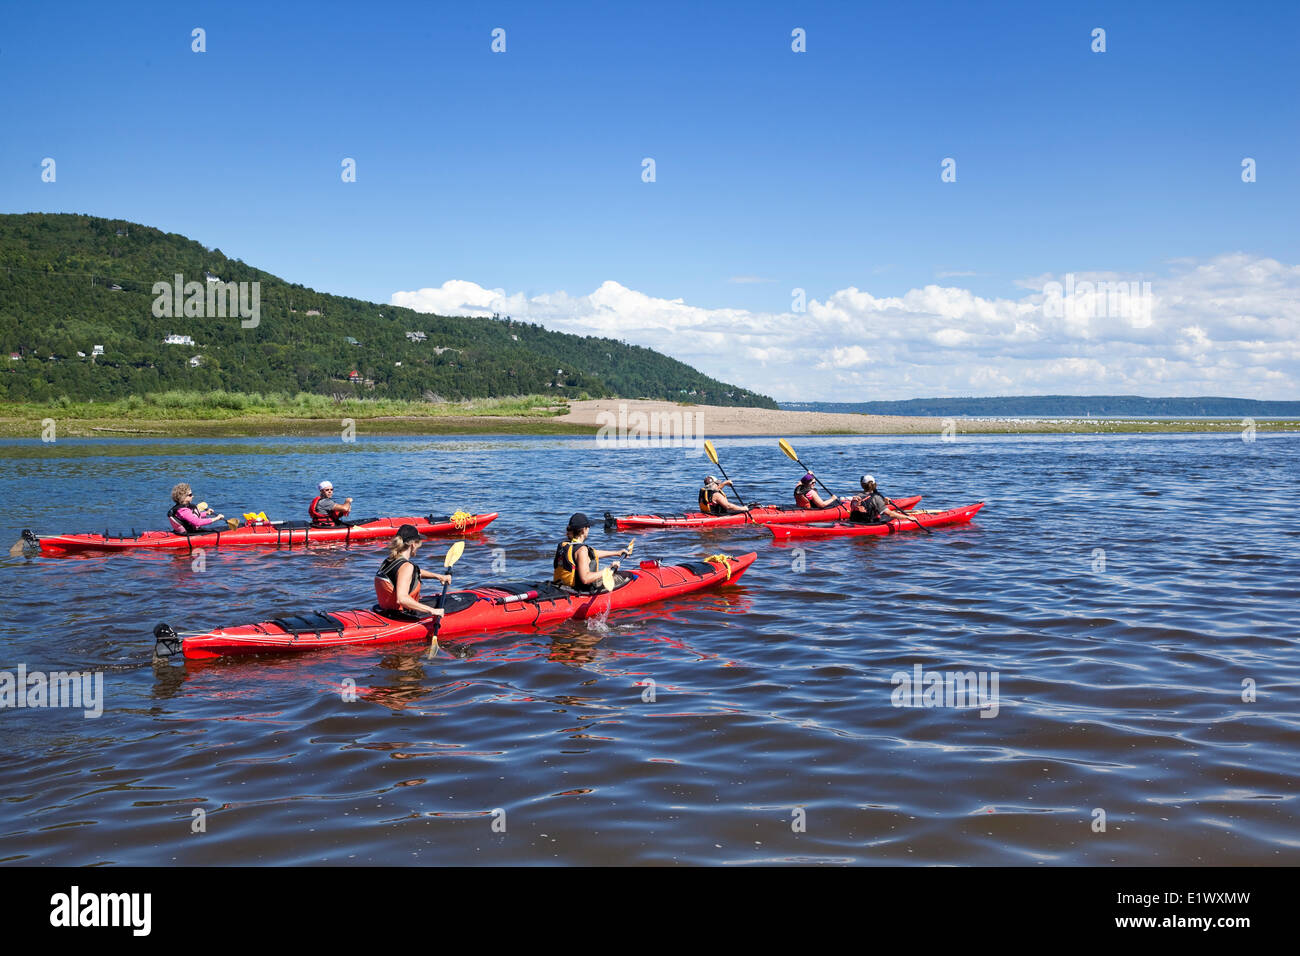 Kayakers and their guide on the Gouffre River, heading out for the open waters of the St. Lawrence River beyond. Baie-Saint-Paul Stock Photo